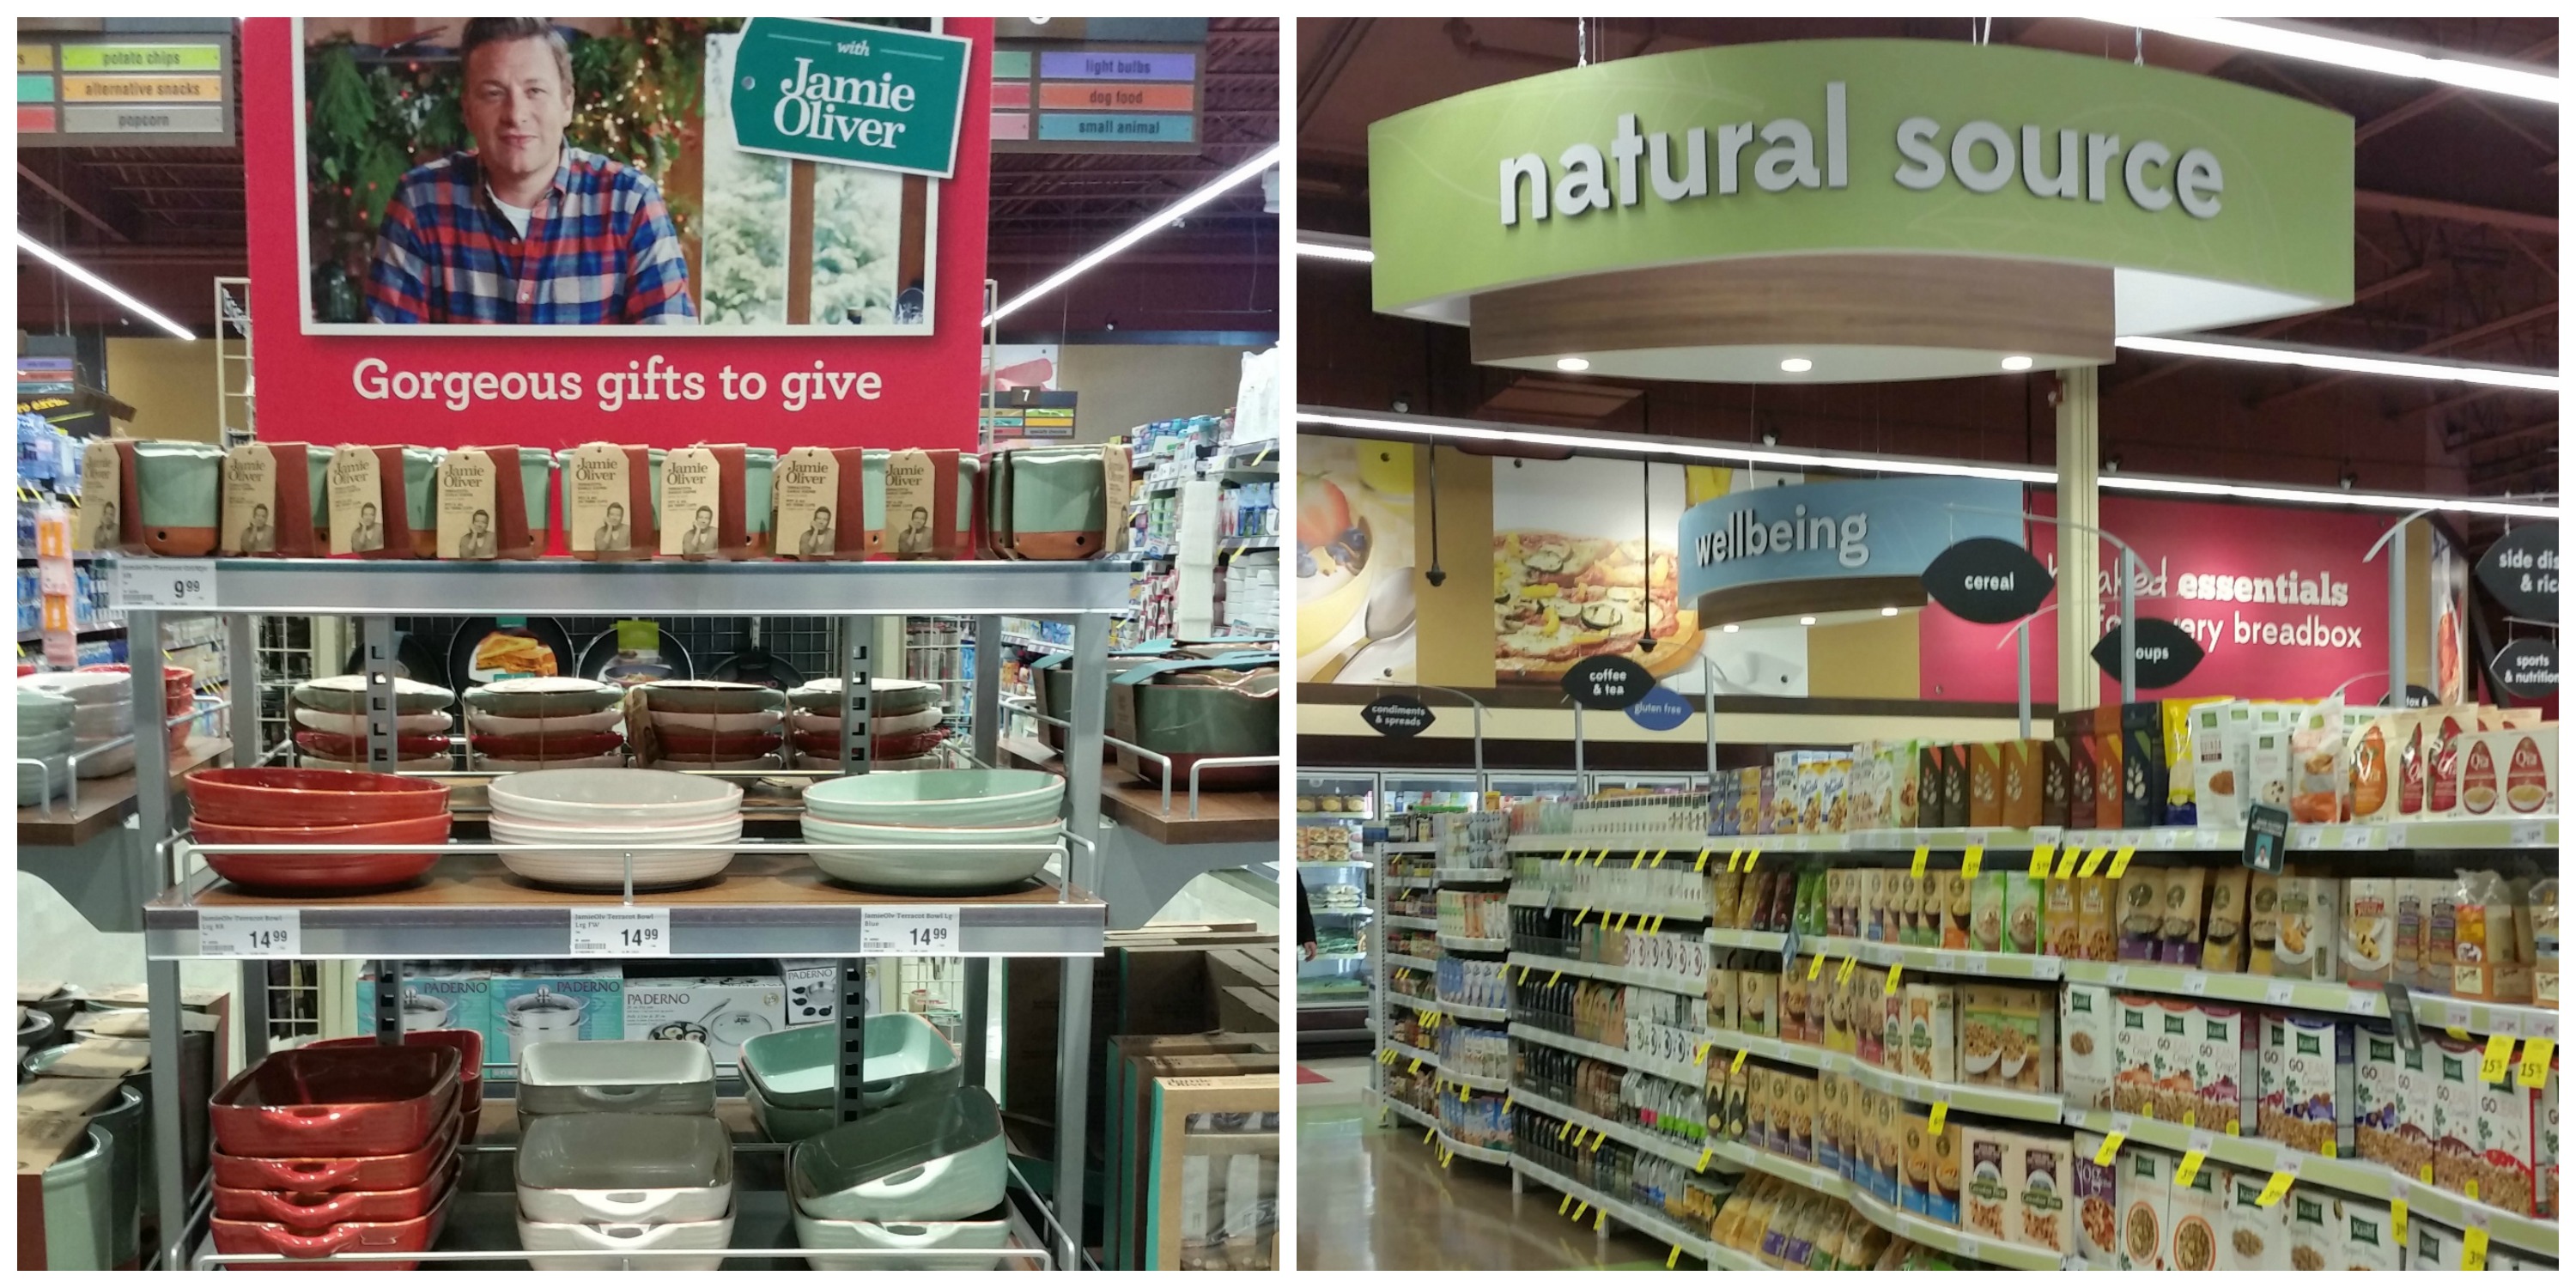 Sobeys North Hill Natural Source section